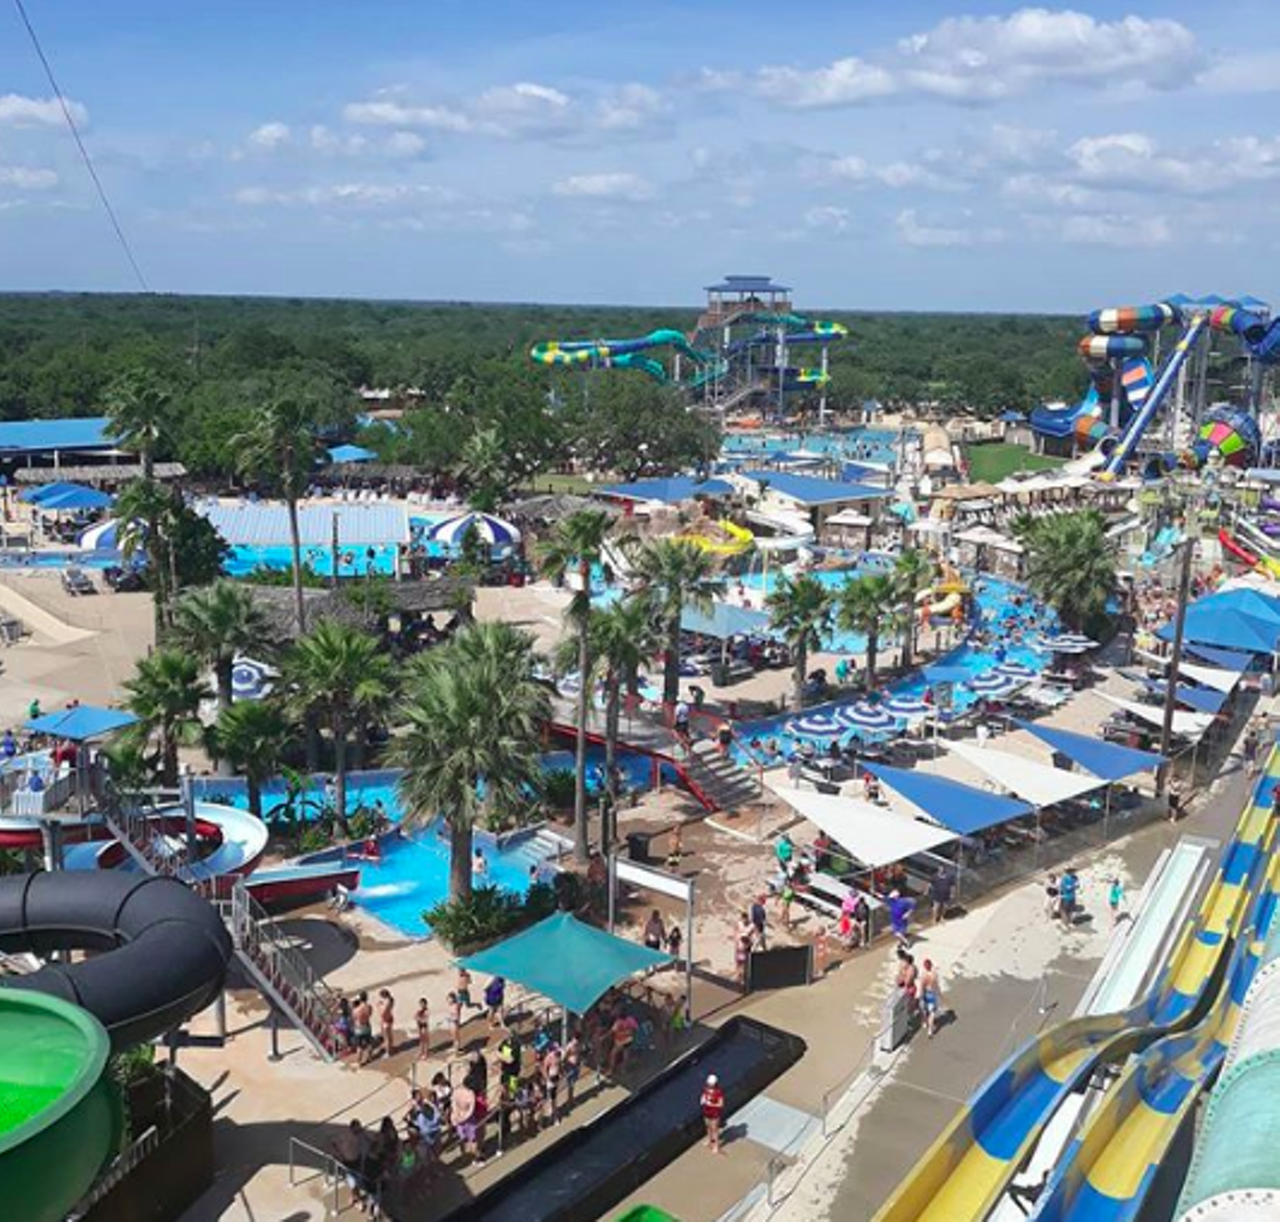 Splashway Waterpark & Campground
5211 Main St, Sheridan, (979) 234-7718, splashway.com
About two hours east of the Alamo City you’ll find this water haven. The family-friendly water park has an abundance of slides, a wave pool, a lazy river and on-site campgrounds if you’re looking to make an overnight trip out of your visit. While the most fun attractions are for bigger kids, teens and adults, little ones have their own designated fun too.
Photo via Instagram / santosreyeslope